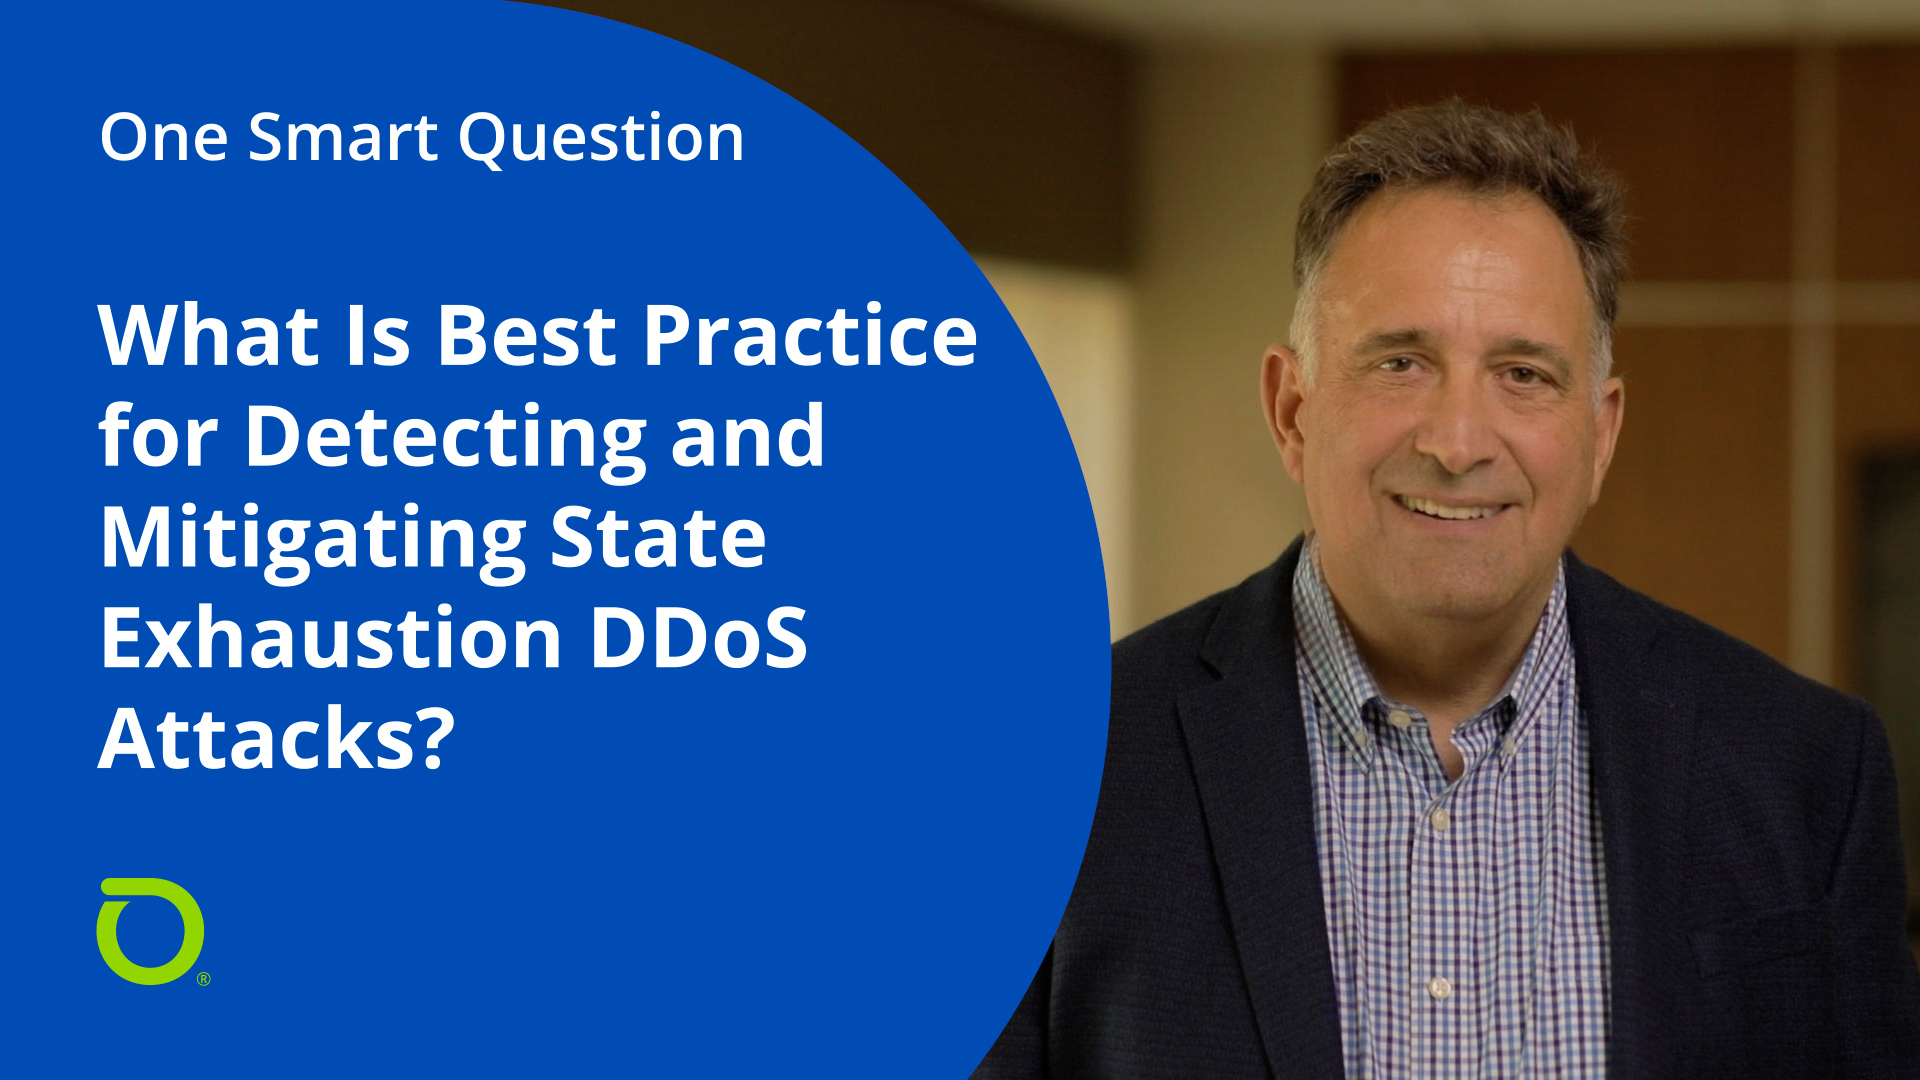 One Smart Question: Detect & mitigate state exhaustion DDoS attacks